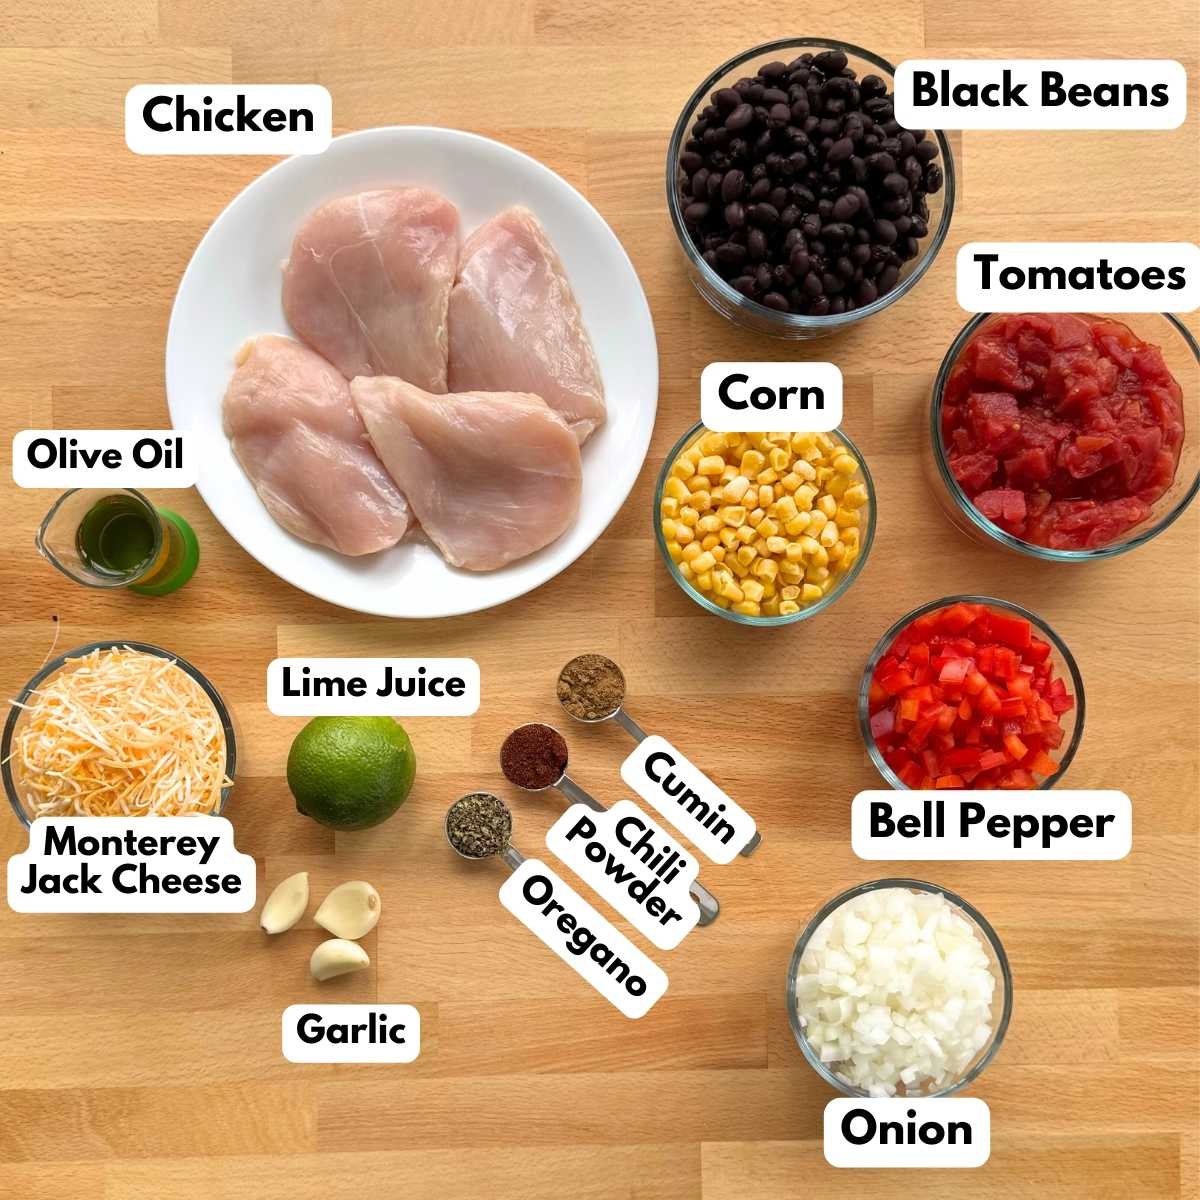 Labeled ingredients to make cowboy chicken recipe: chicken, black beans, corn, tomatoes, bell pepper, onion, shredded cheese, cumin, chili powder, oregano, lime, garlic, lime juice.